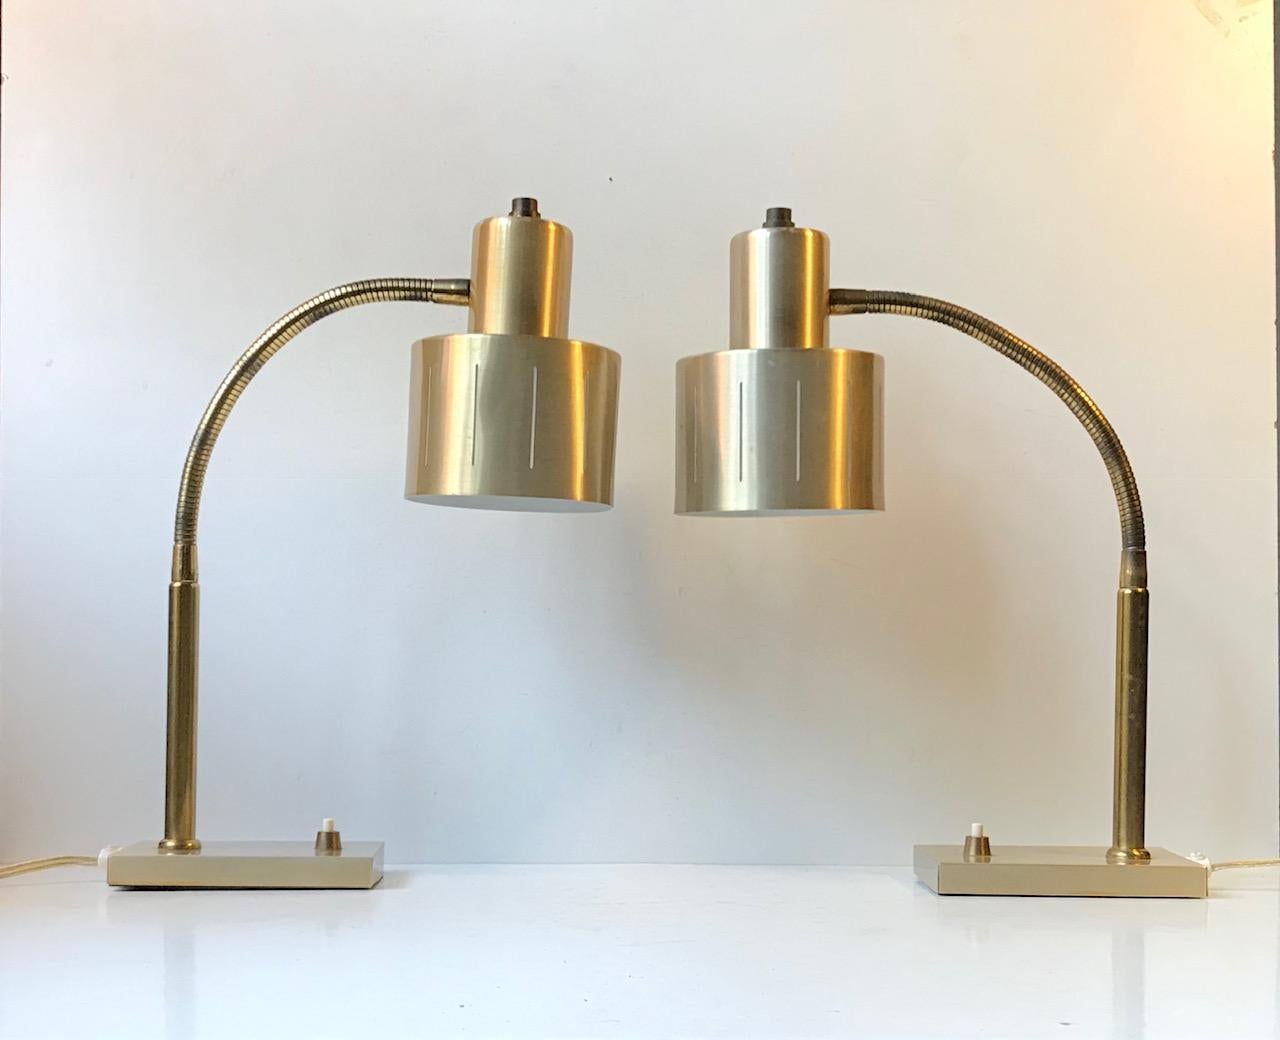 Matching pair of fully adjustable table light by Vitrika. The lights features flexible brass goose necks, perforated shades and small stylish on/of switches to the bases. These lights were manufactured and designed by Vitrika in Denmark during the